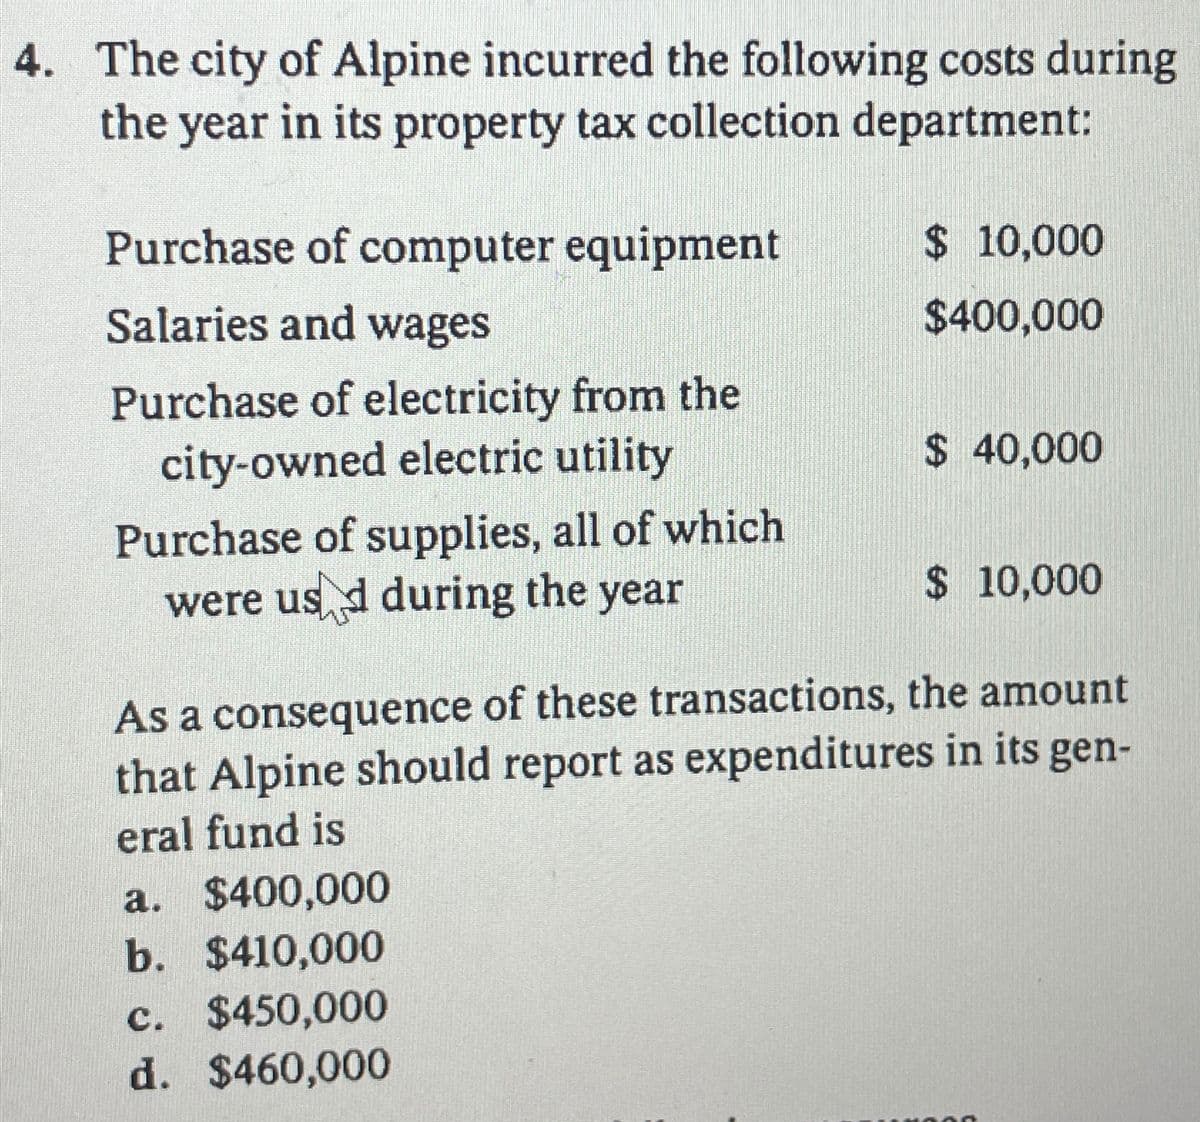 4. The city of Alpine incurred the following costs during
the year in its property tax collection department:
Purchase of computer equipment
Salaries and wages
Purchase of electricity from the
city-owned electric utility
Purchase of supplies, all of which
were used during the year
$ 10,000
$400,000
a. $400,000
b. $410,000
c. $450,000
d. $460,000
$ 40,000
$ 10,000
As a consequence of these transactions, the amount
that Alpine should report as expenditures in its gen-
eral fund is
4000